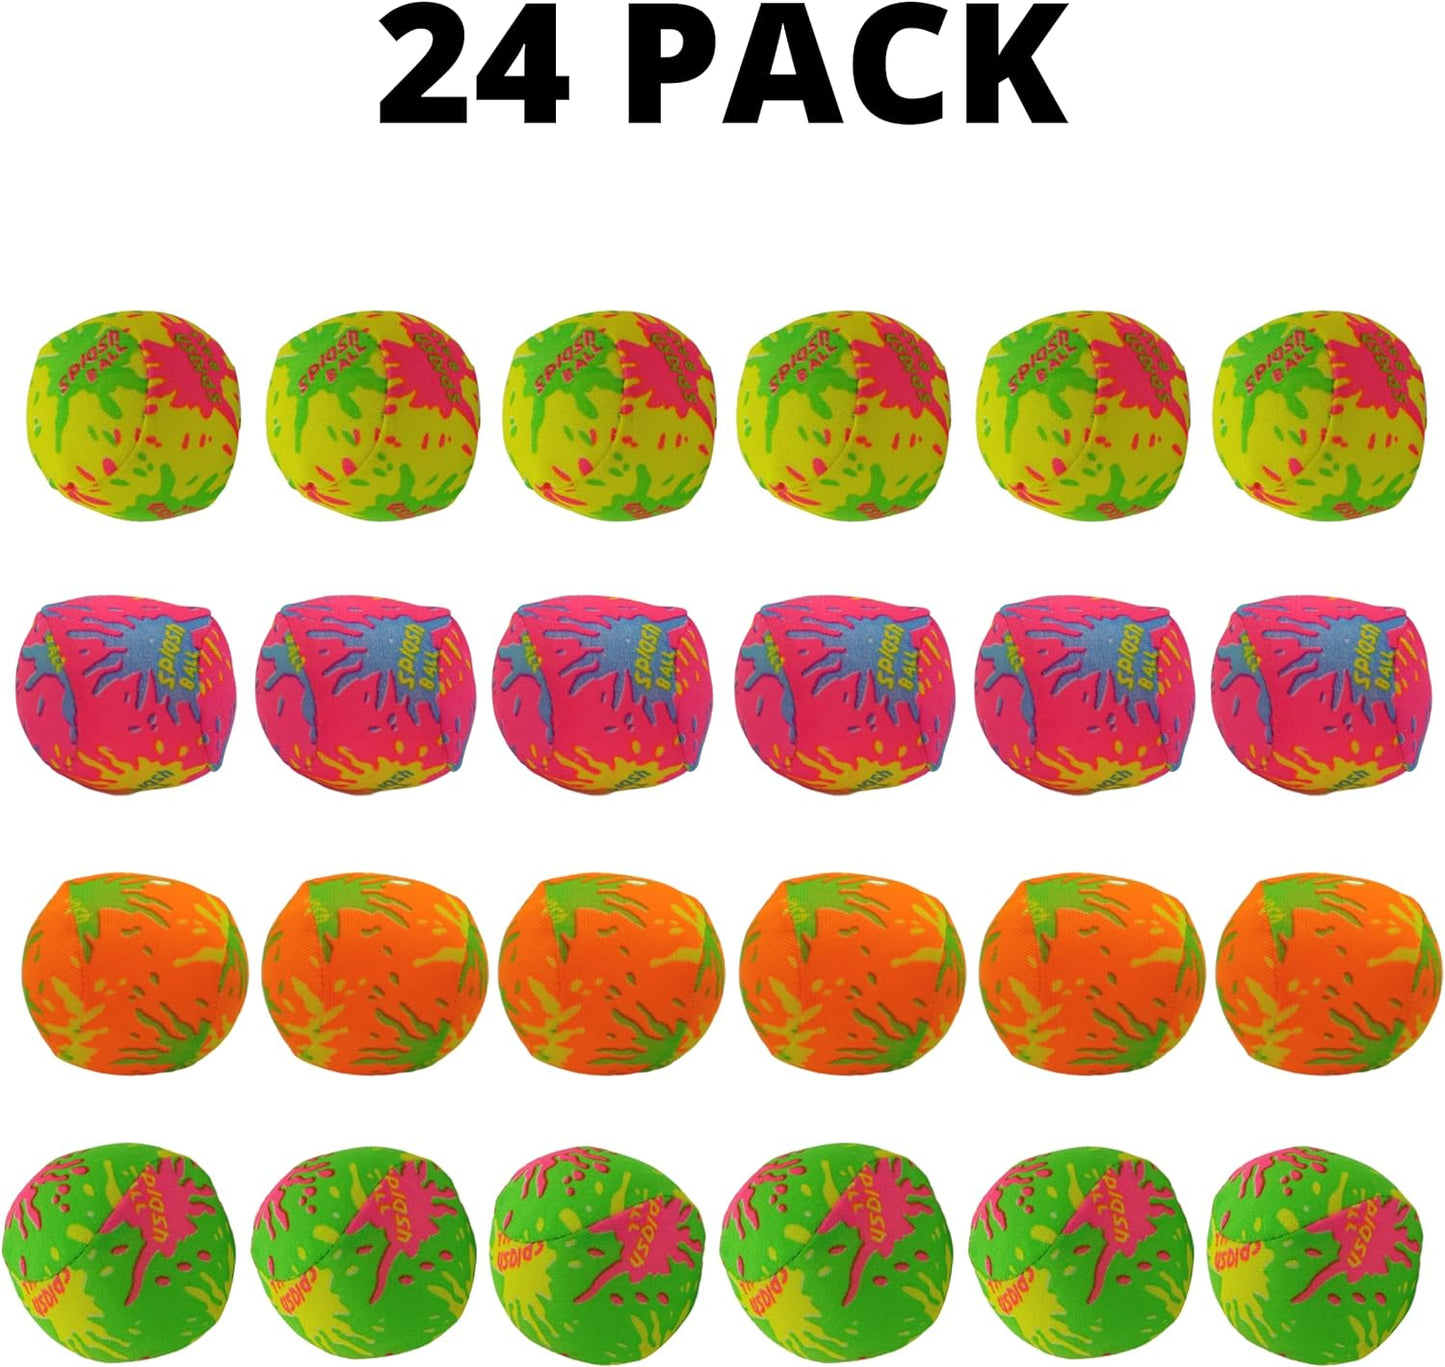 24 Pack - 2" Water Bomb Splash Balls - Mini Water Absorbent Ball - Kids Pool Toys, Outdoor Water Activities for Kids, Pool Beach Party Favors. Water Fight Games